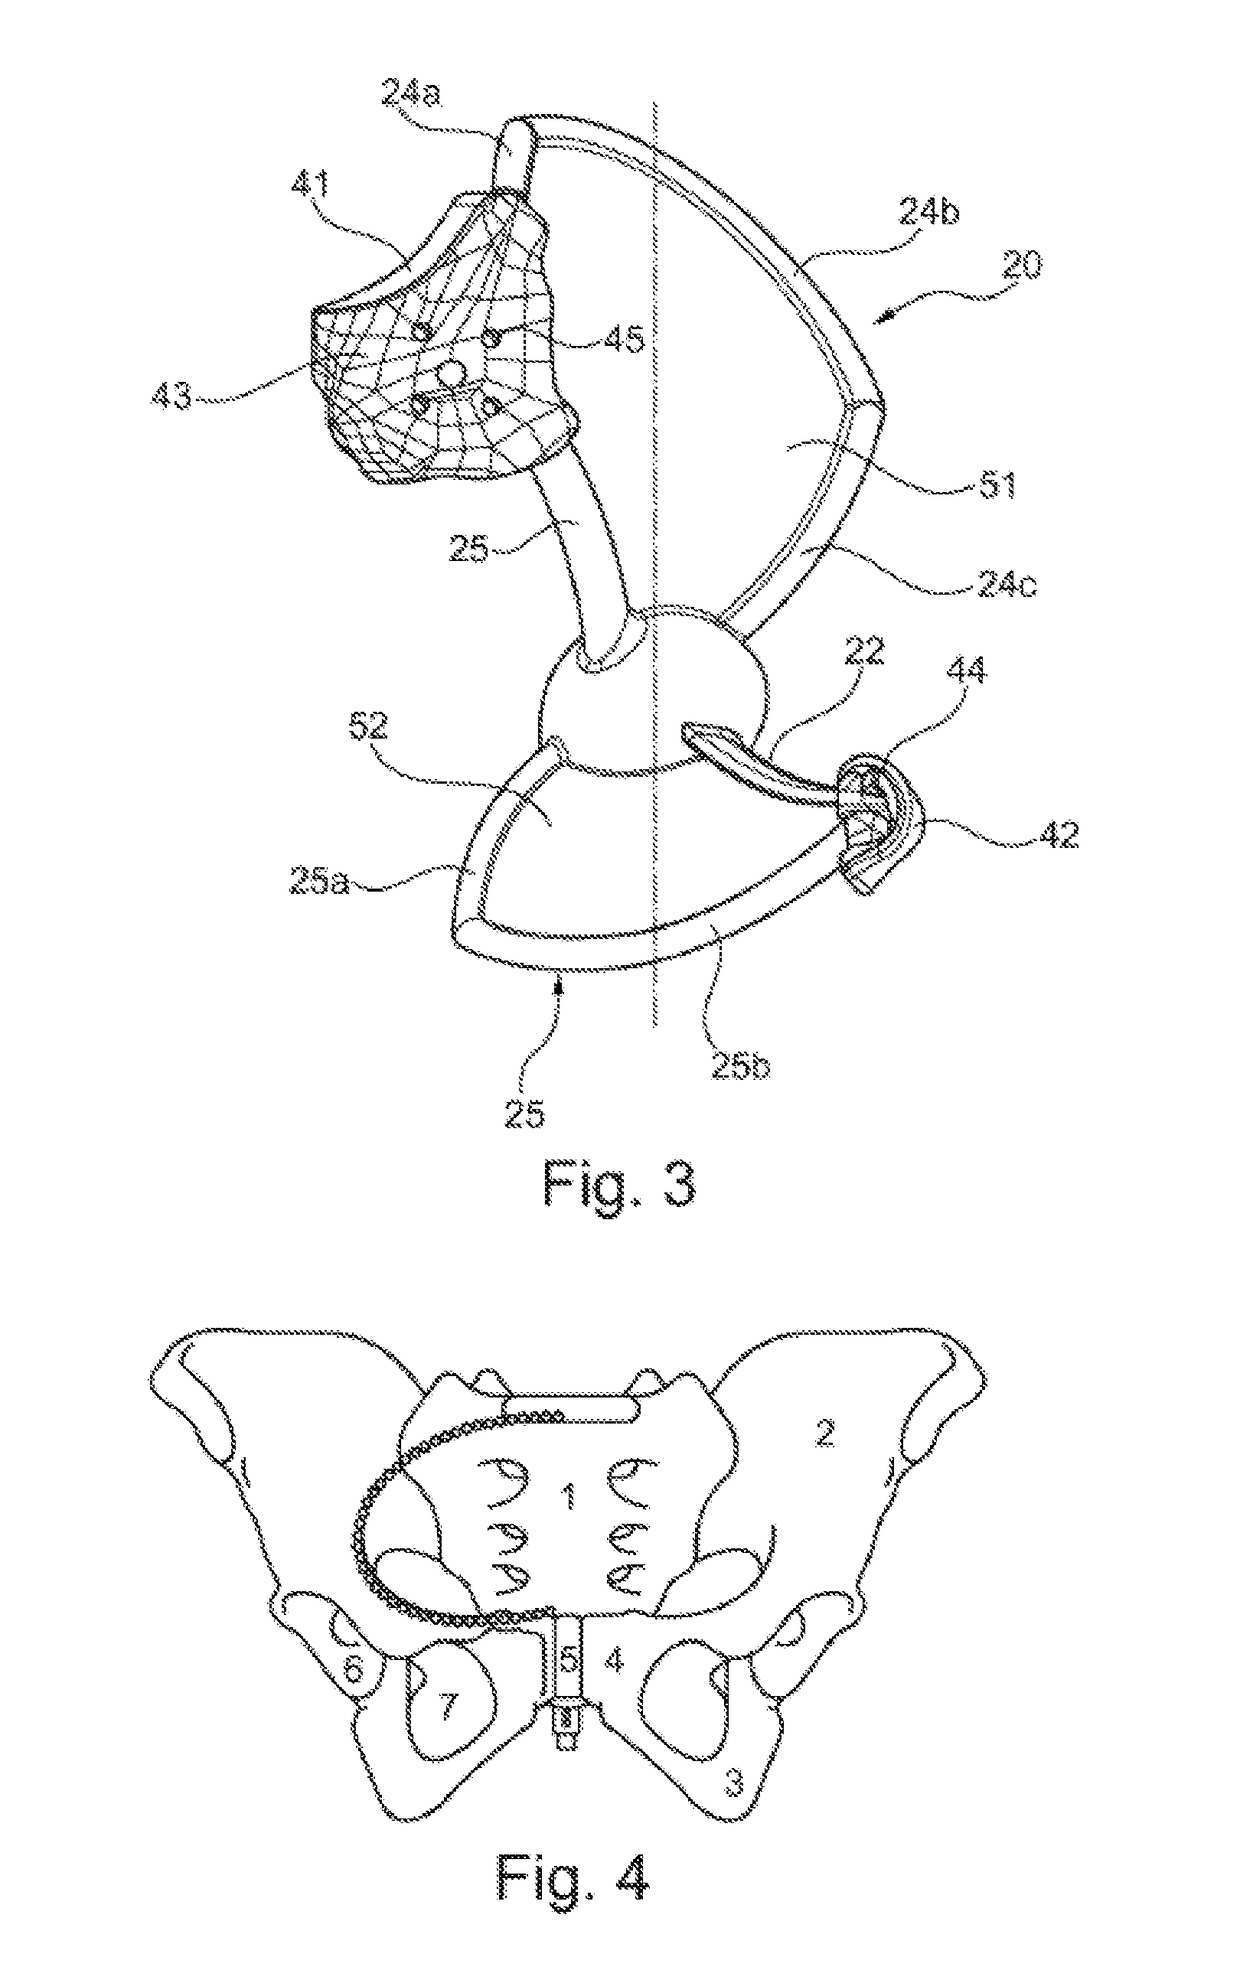 Implant for reconstructing an acetabulum and at least part of a pelvic structure